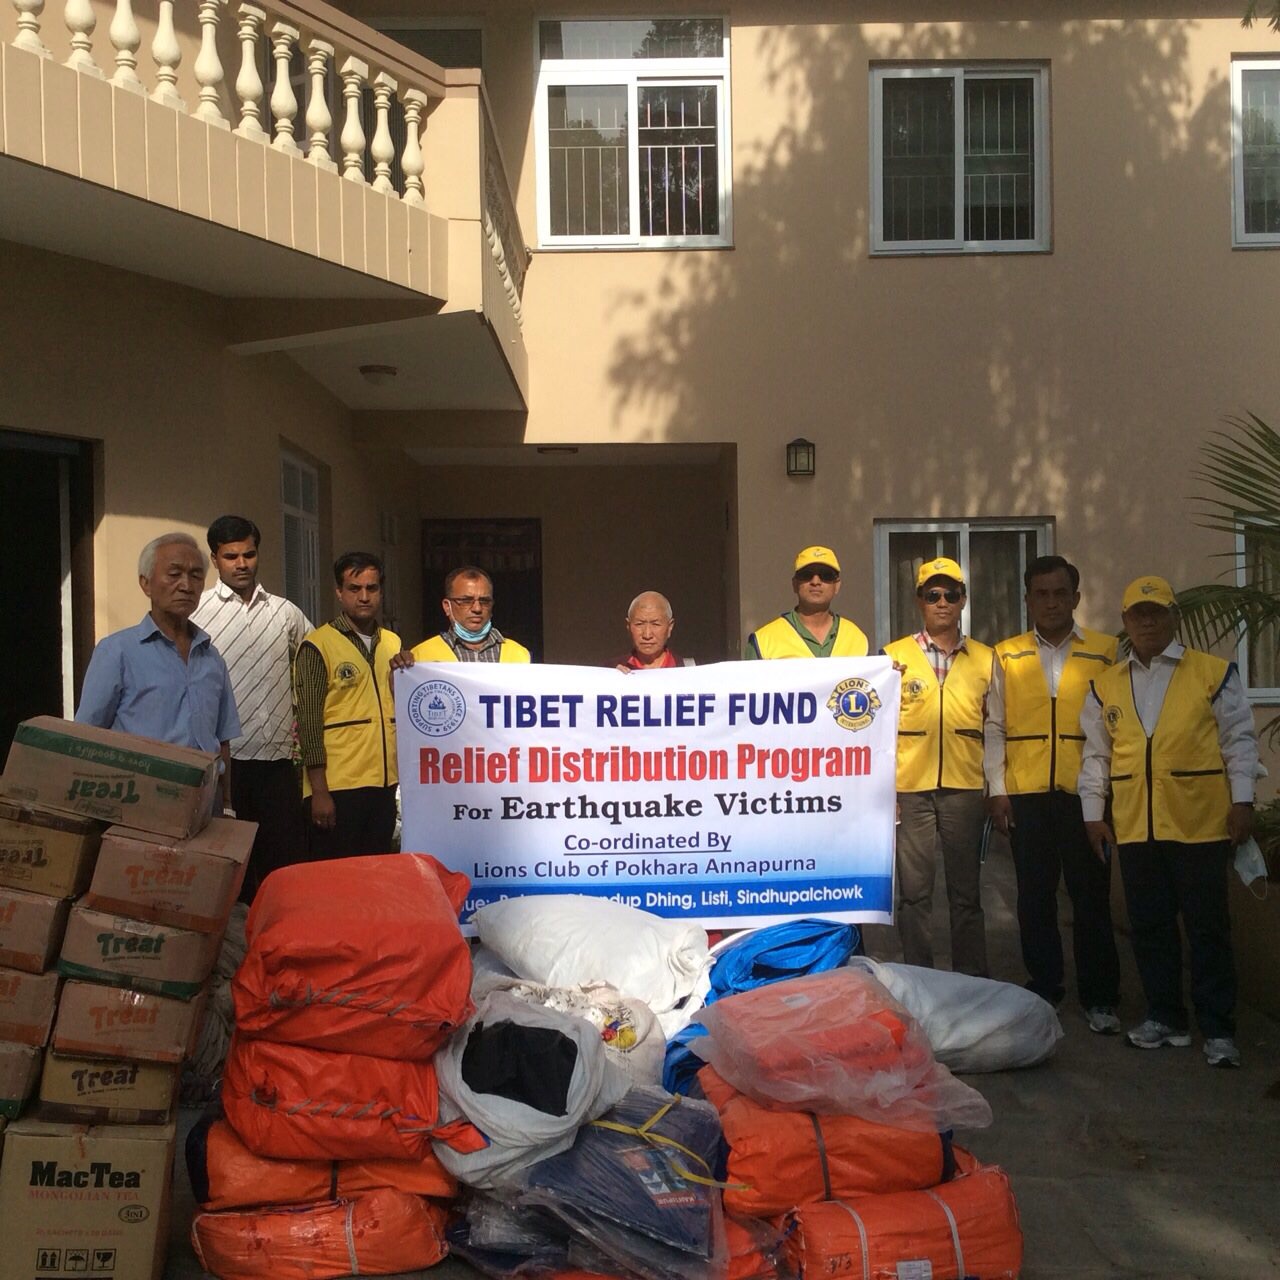 Thank you. Supplies funded by your donations leaving Kathmandu